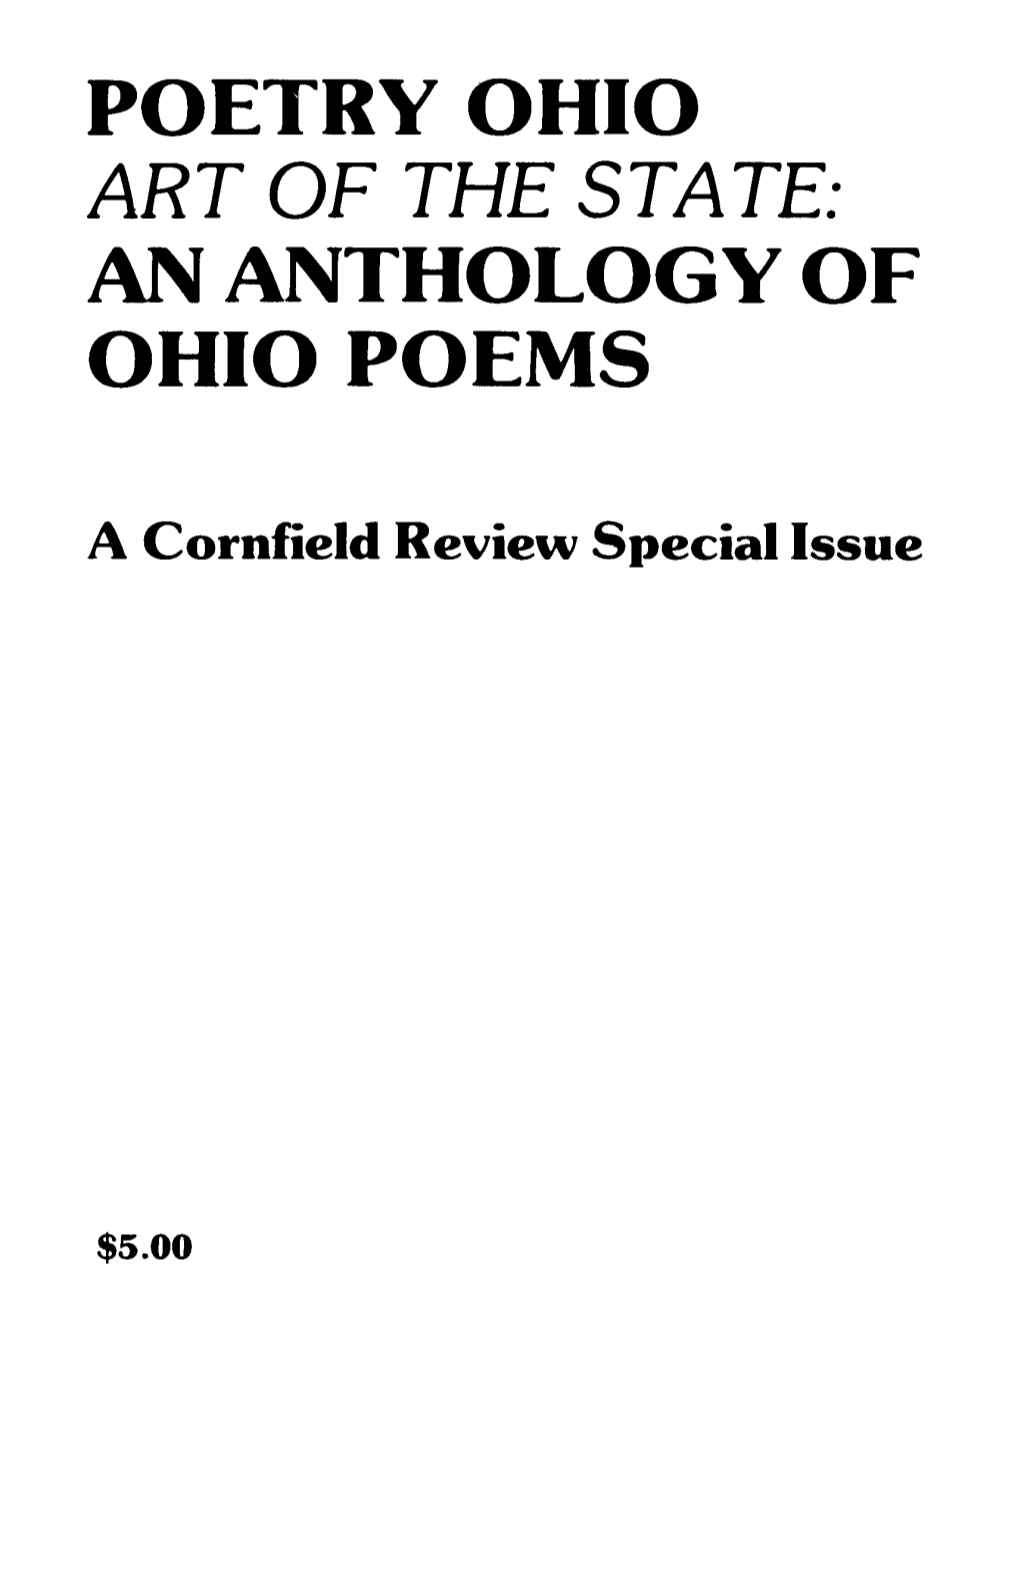 Poetry Ohio Art of the State: an Anthology of Ohio Poems